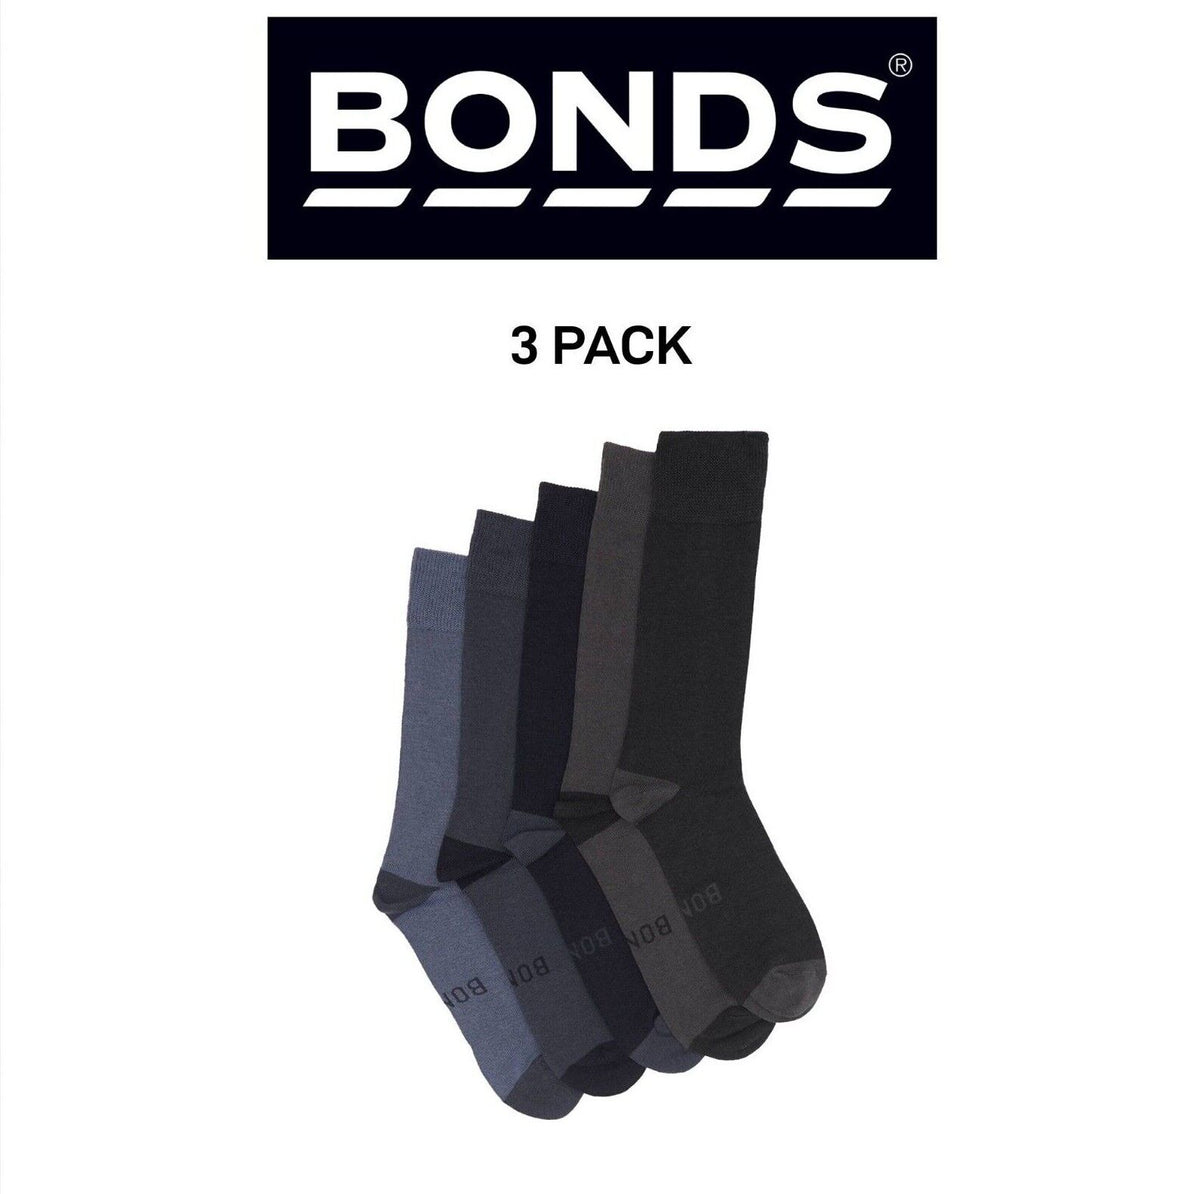 Bonds Mens Bamboo Crew Socks Fine Seams Comfy Toes & Ankle Support 3 Pack SZFQ5W